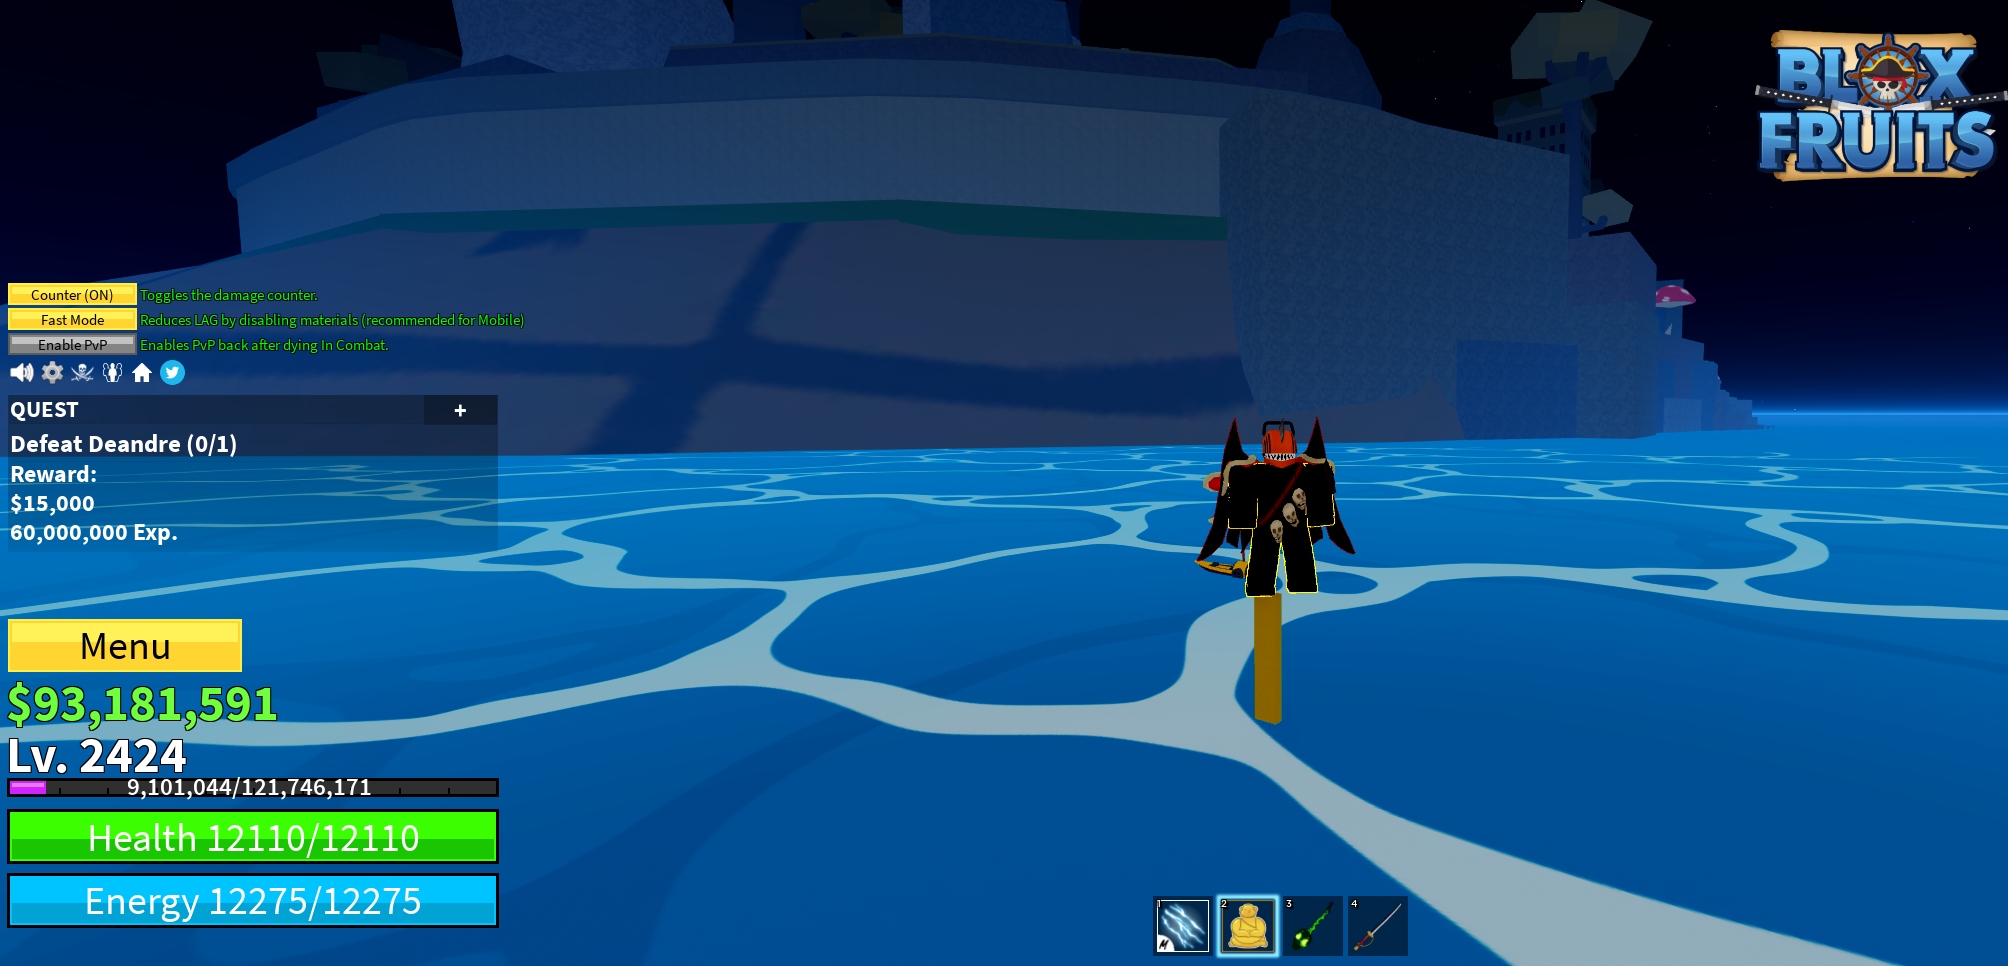 HOW TO GO THIRD SEA in Blox Fruits! 